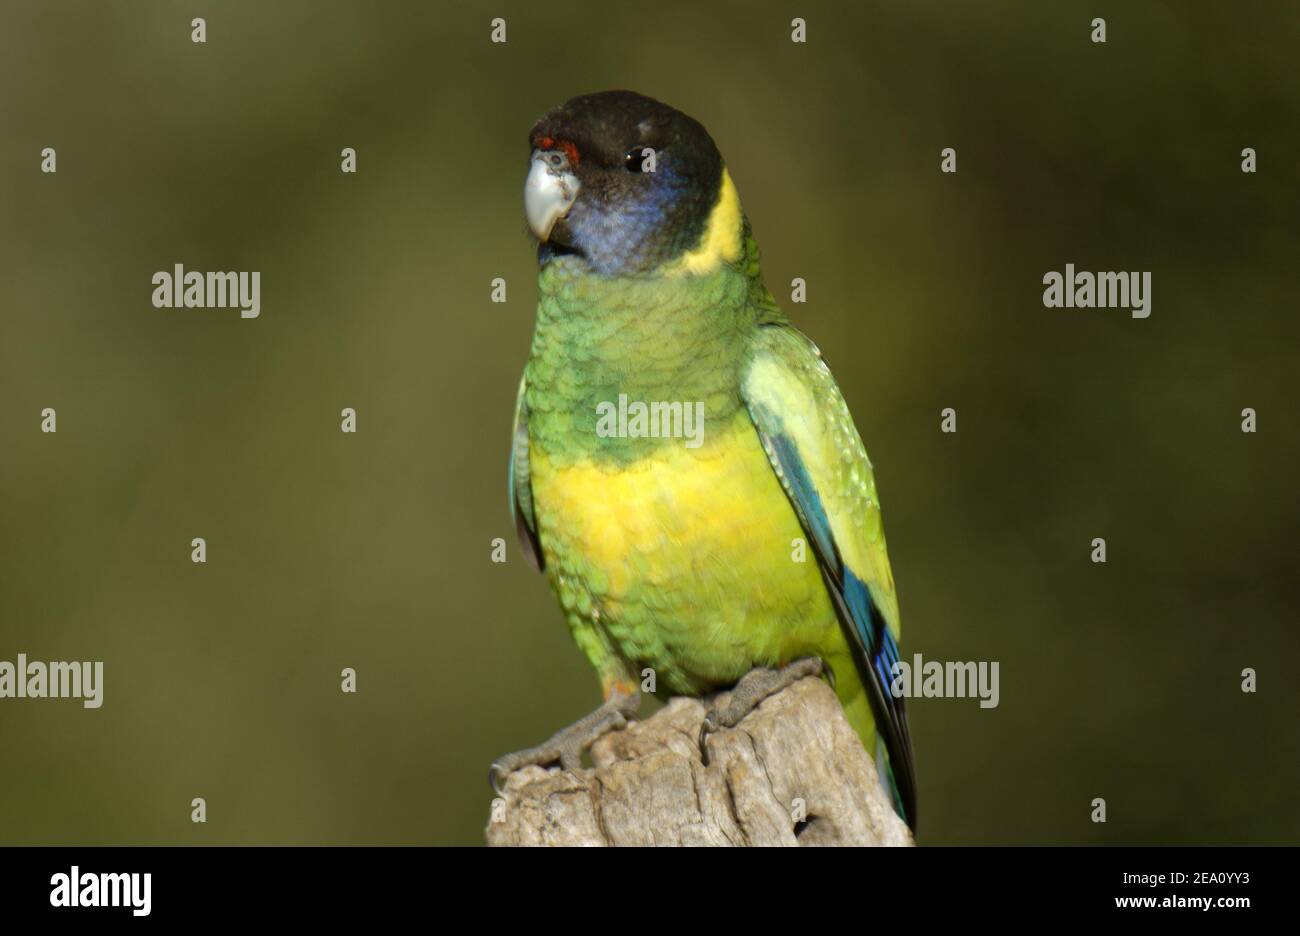 The Australian Ringneck (Barnardius zonarius) is a parrot native to Australia seen here in the outback of Western Australia. Stock Photo